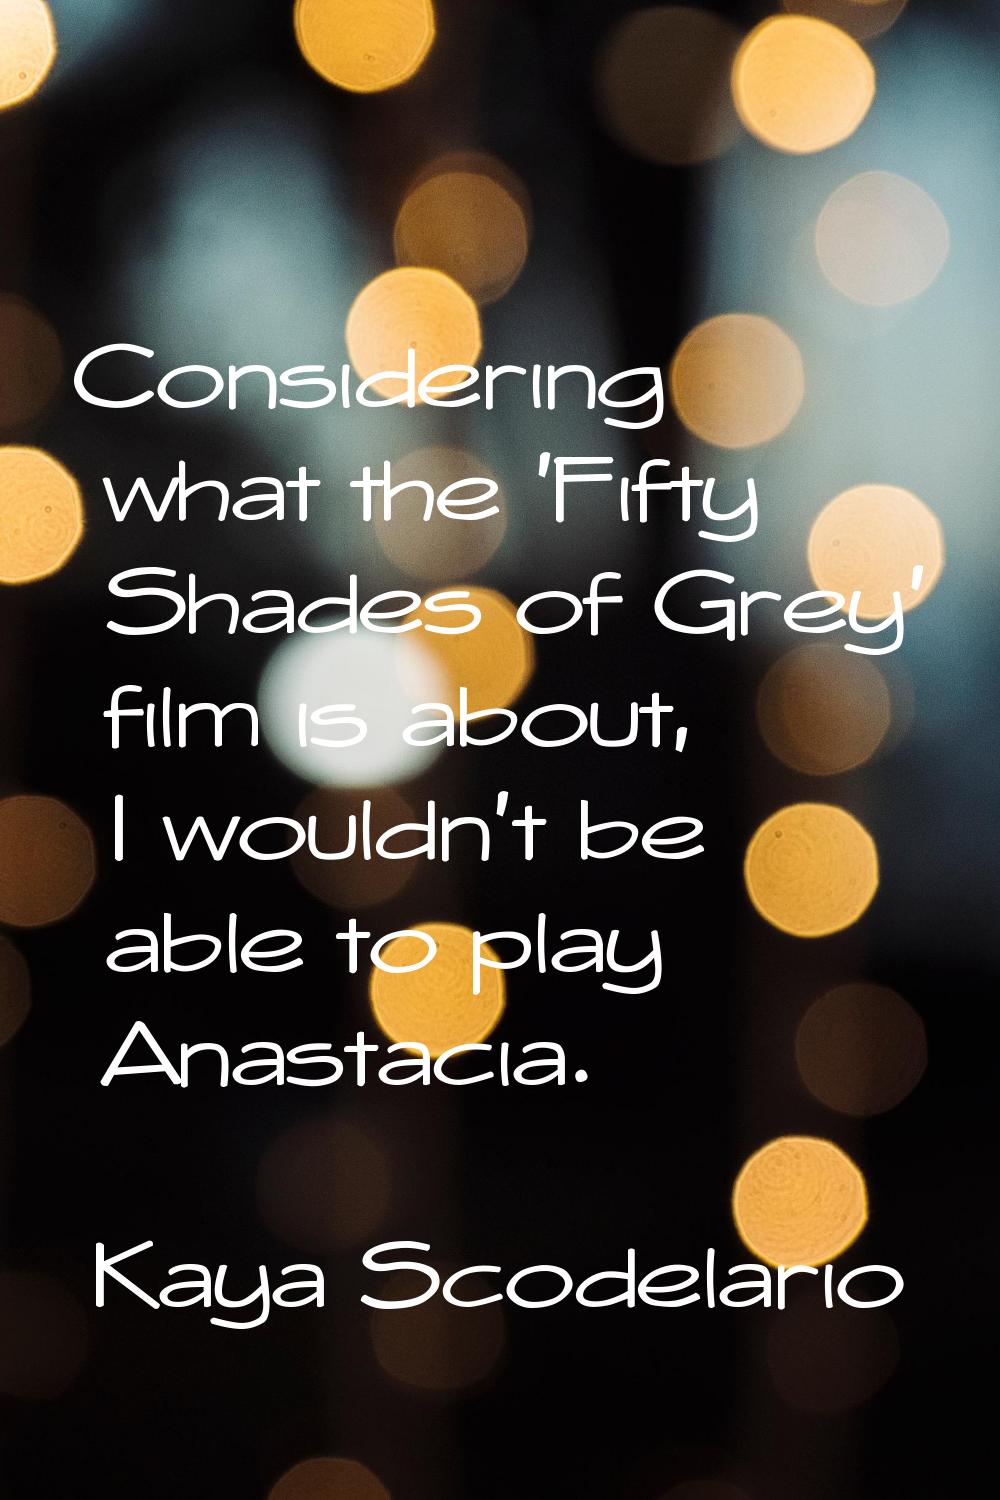 Considering what the 'Fifty Shades of Grey' film is about, I wouldn't be able to play Anastacia.